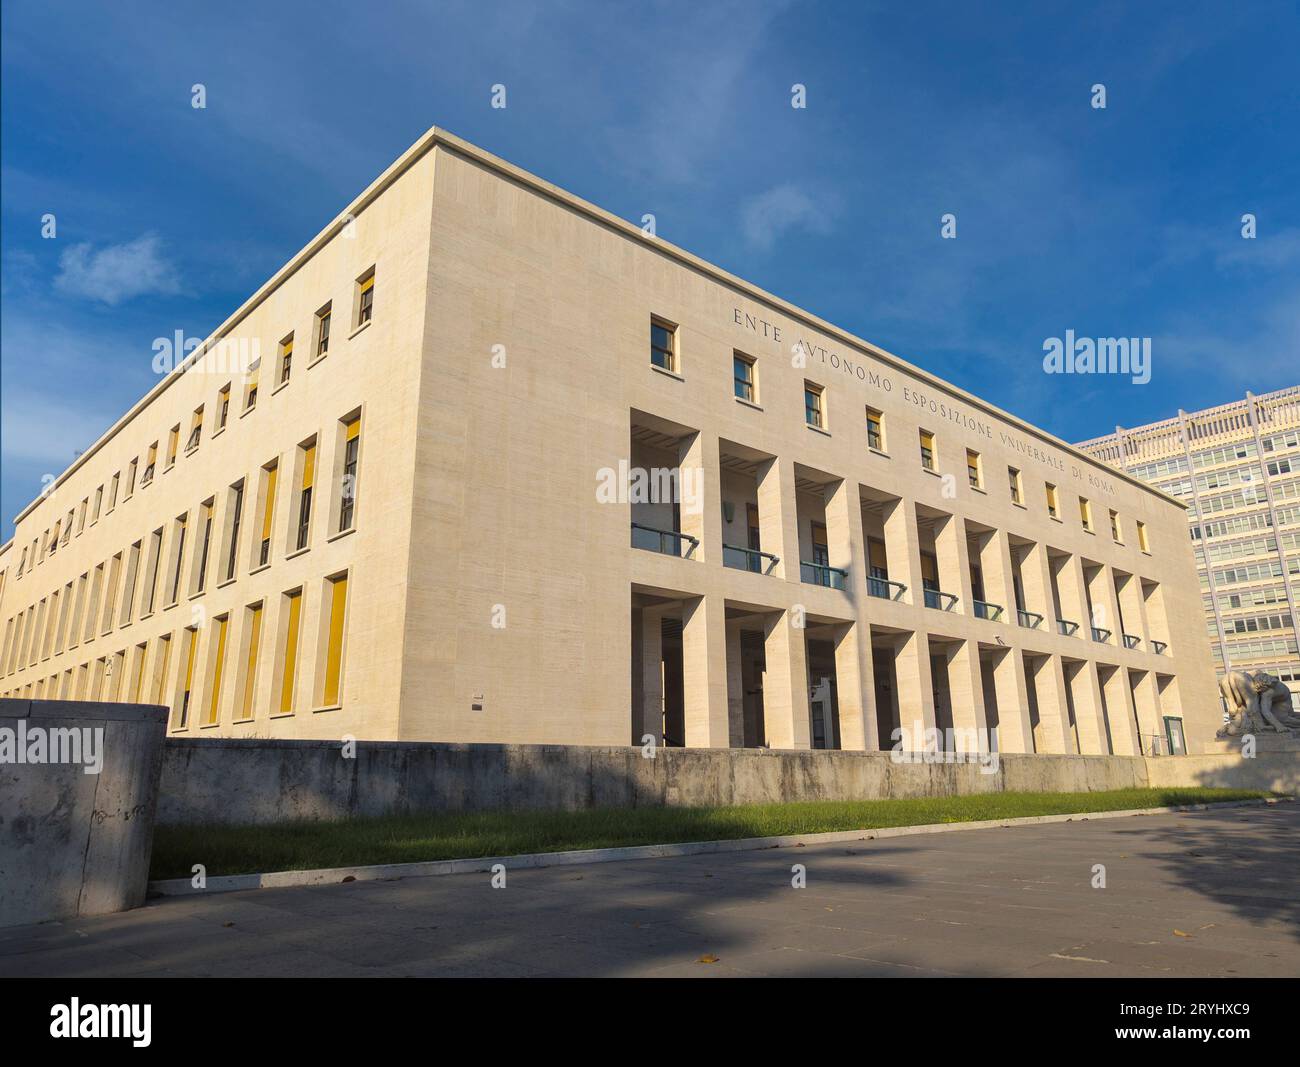 Palazzo degli Uffici is a building in Rome located in the EUR district, home to the offices of the  Universal Exhibition Authority of Rome, Italy Stock Photo